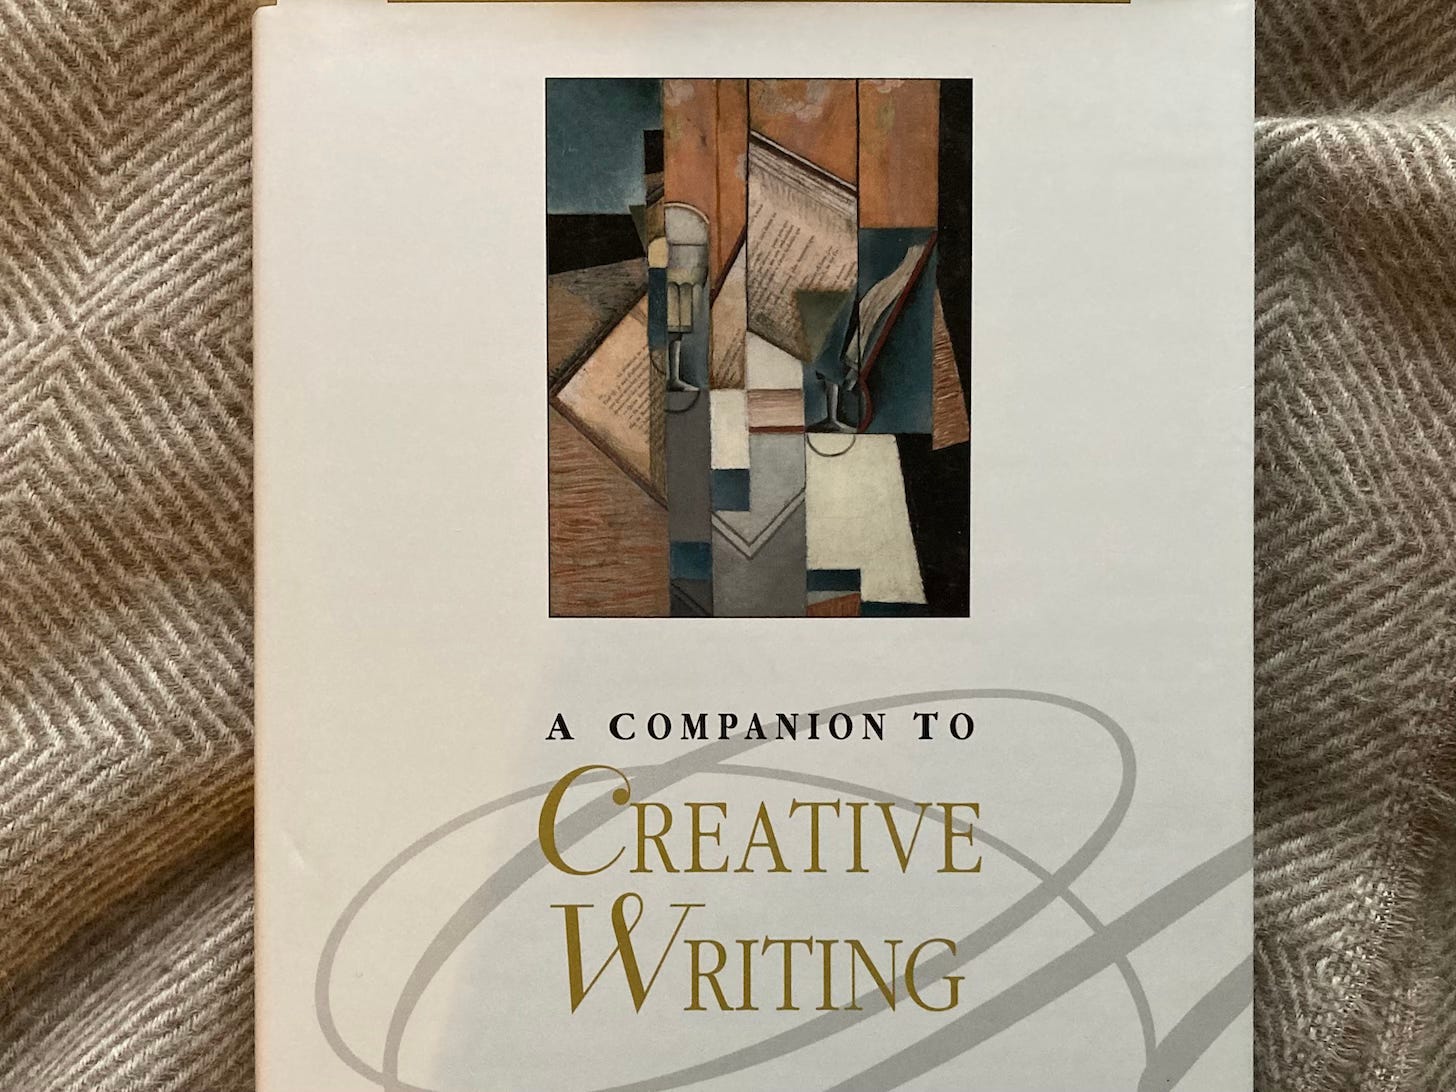 Image of a book with the title A Companion to Creative Writing